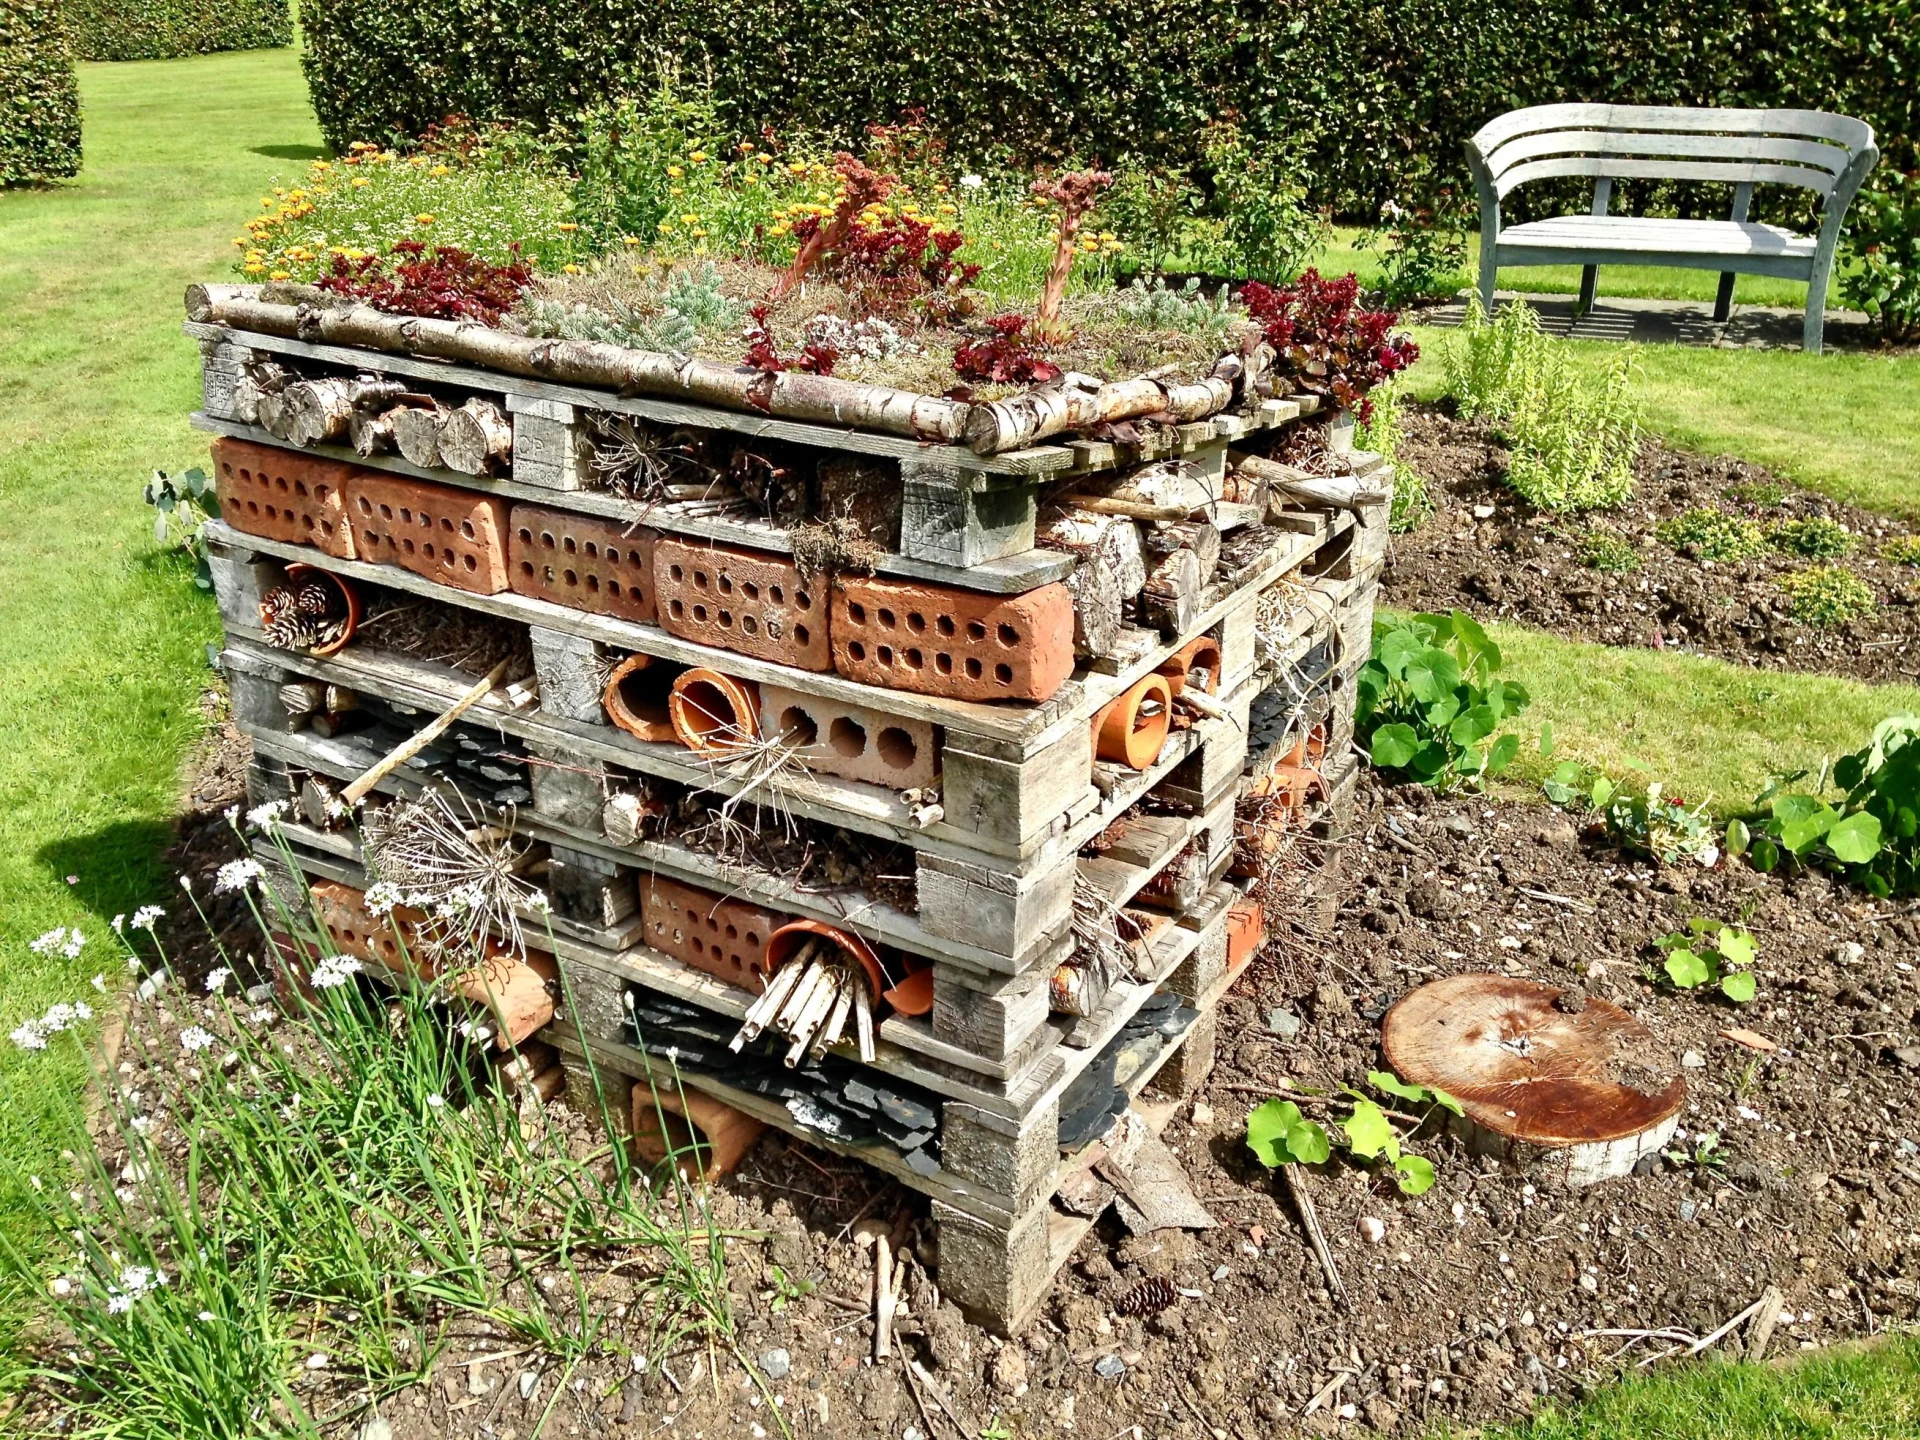 A self-made insect hotel